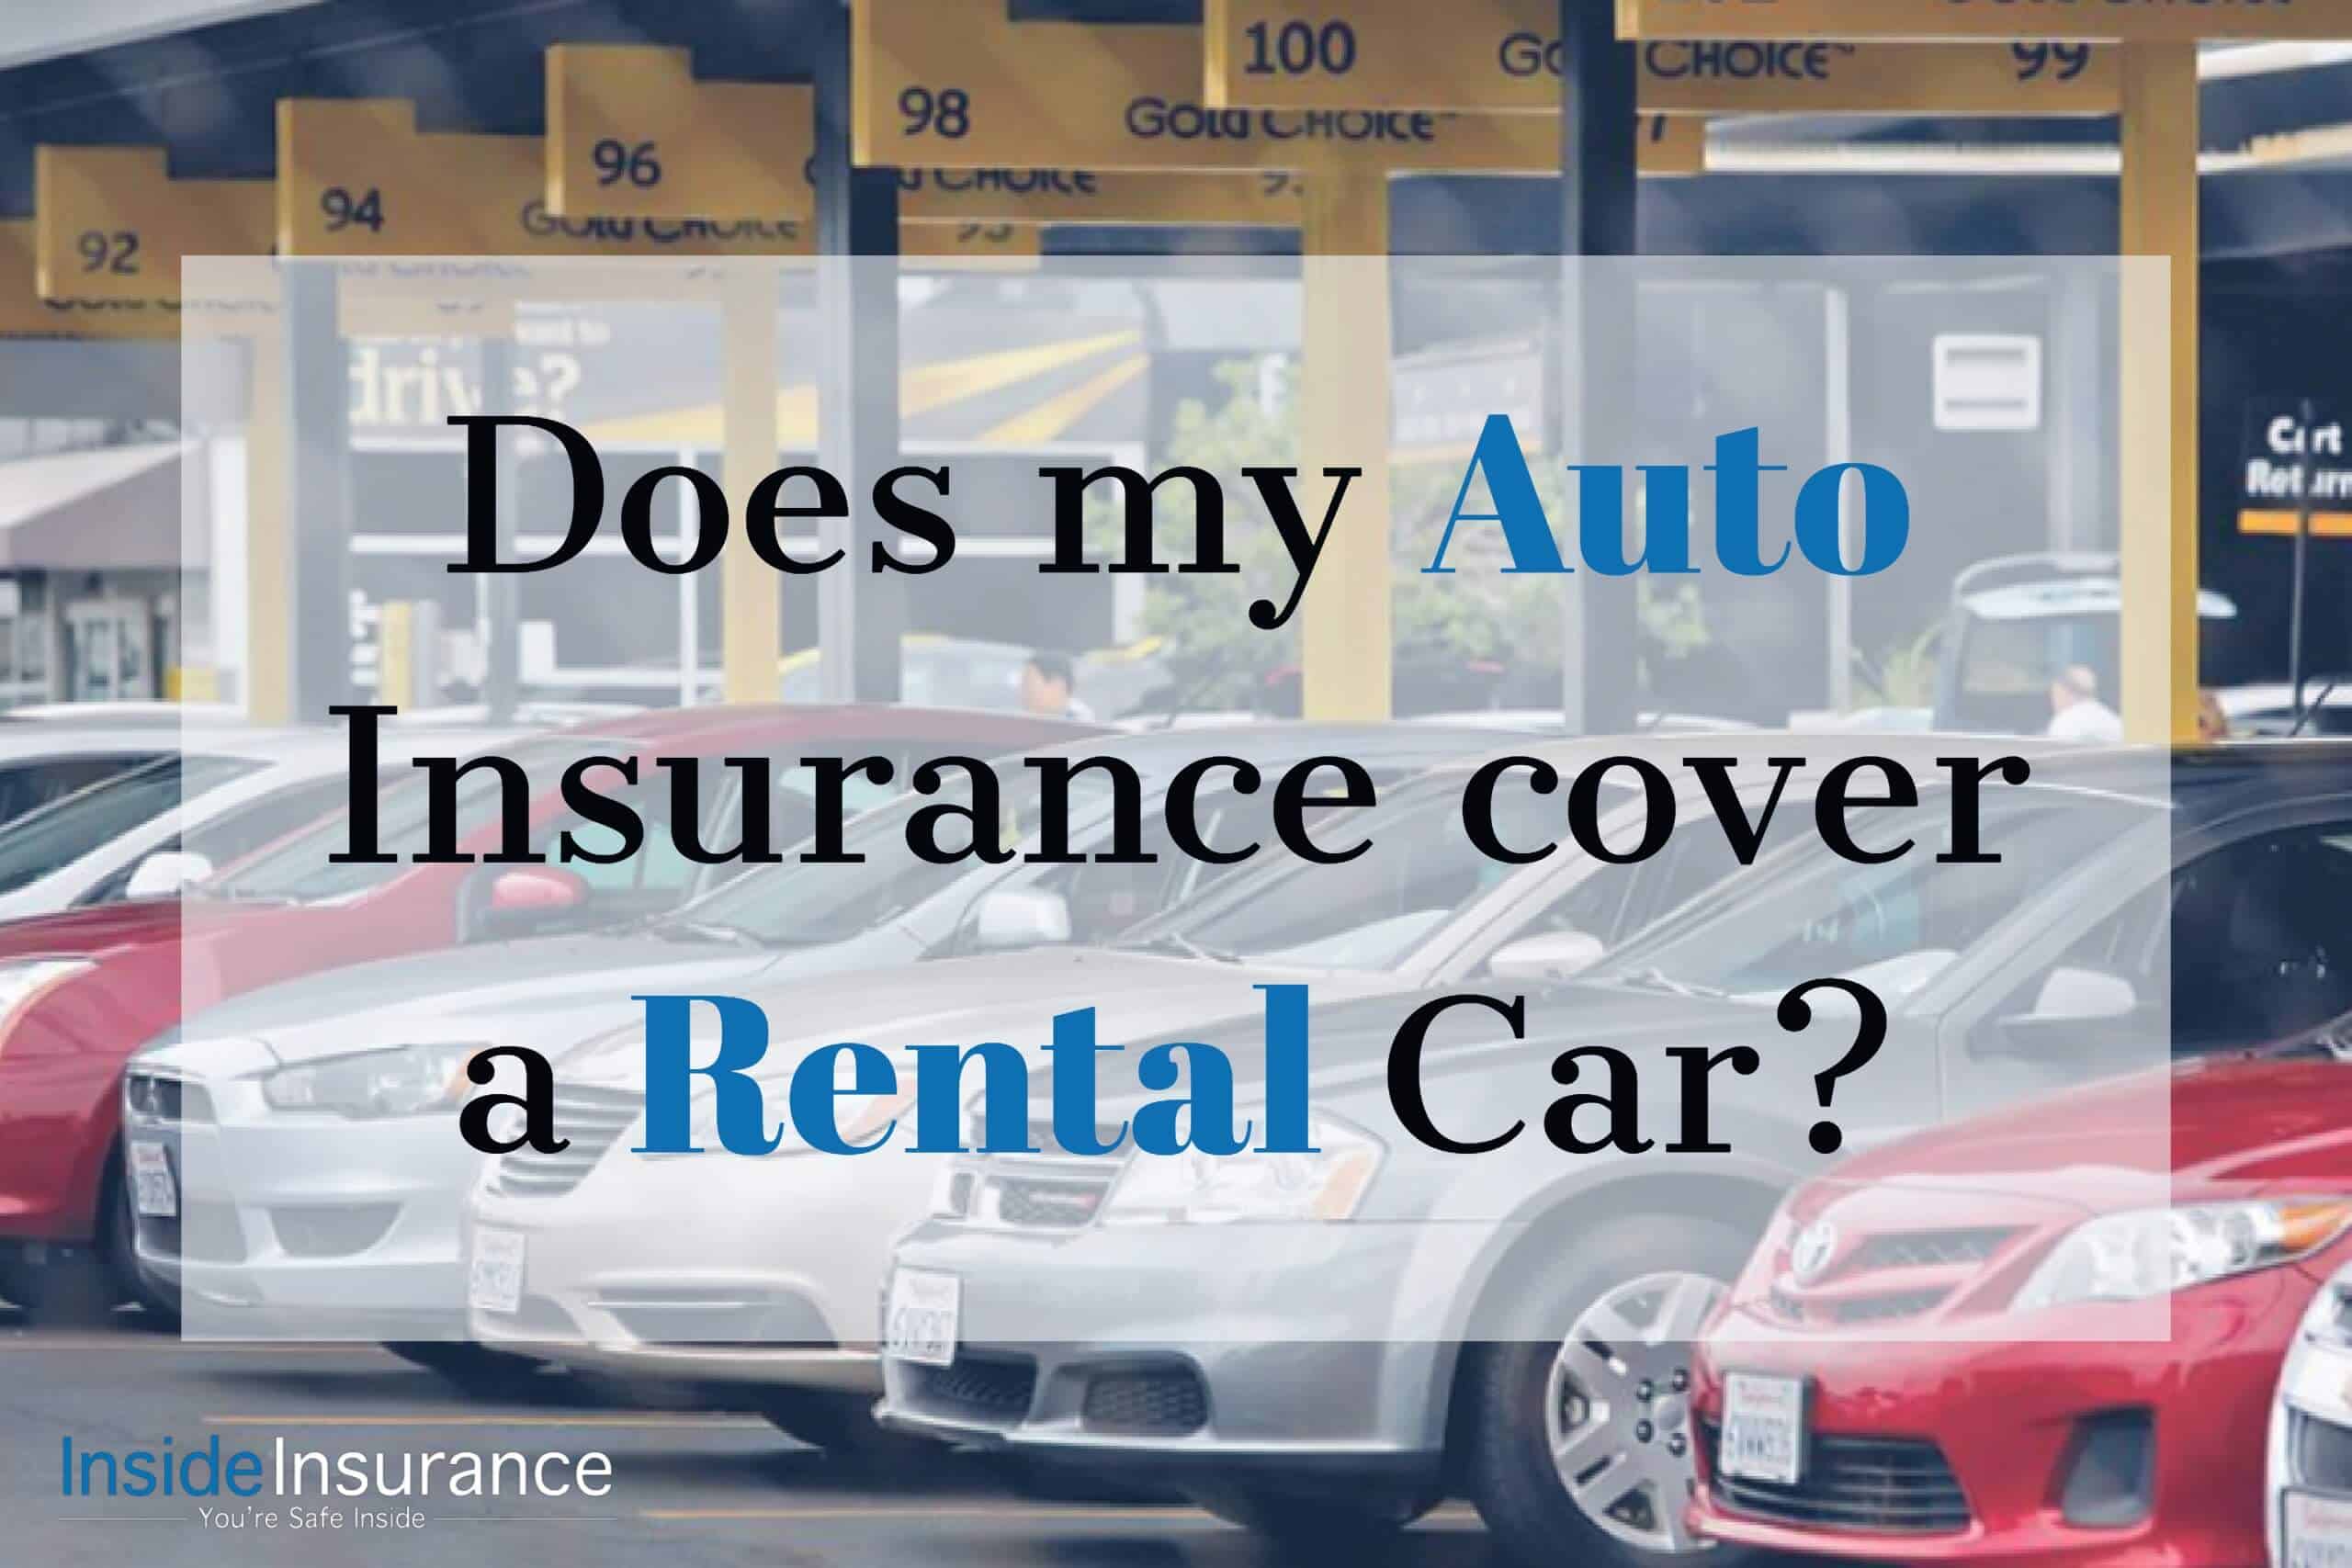 alt="Silver, gray and red cars lined up on an gate lane with a note that says 'Does my Auto Insurance cover a rental Car'."